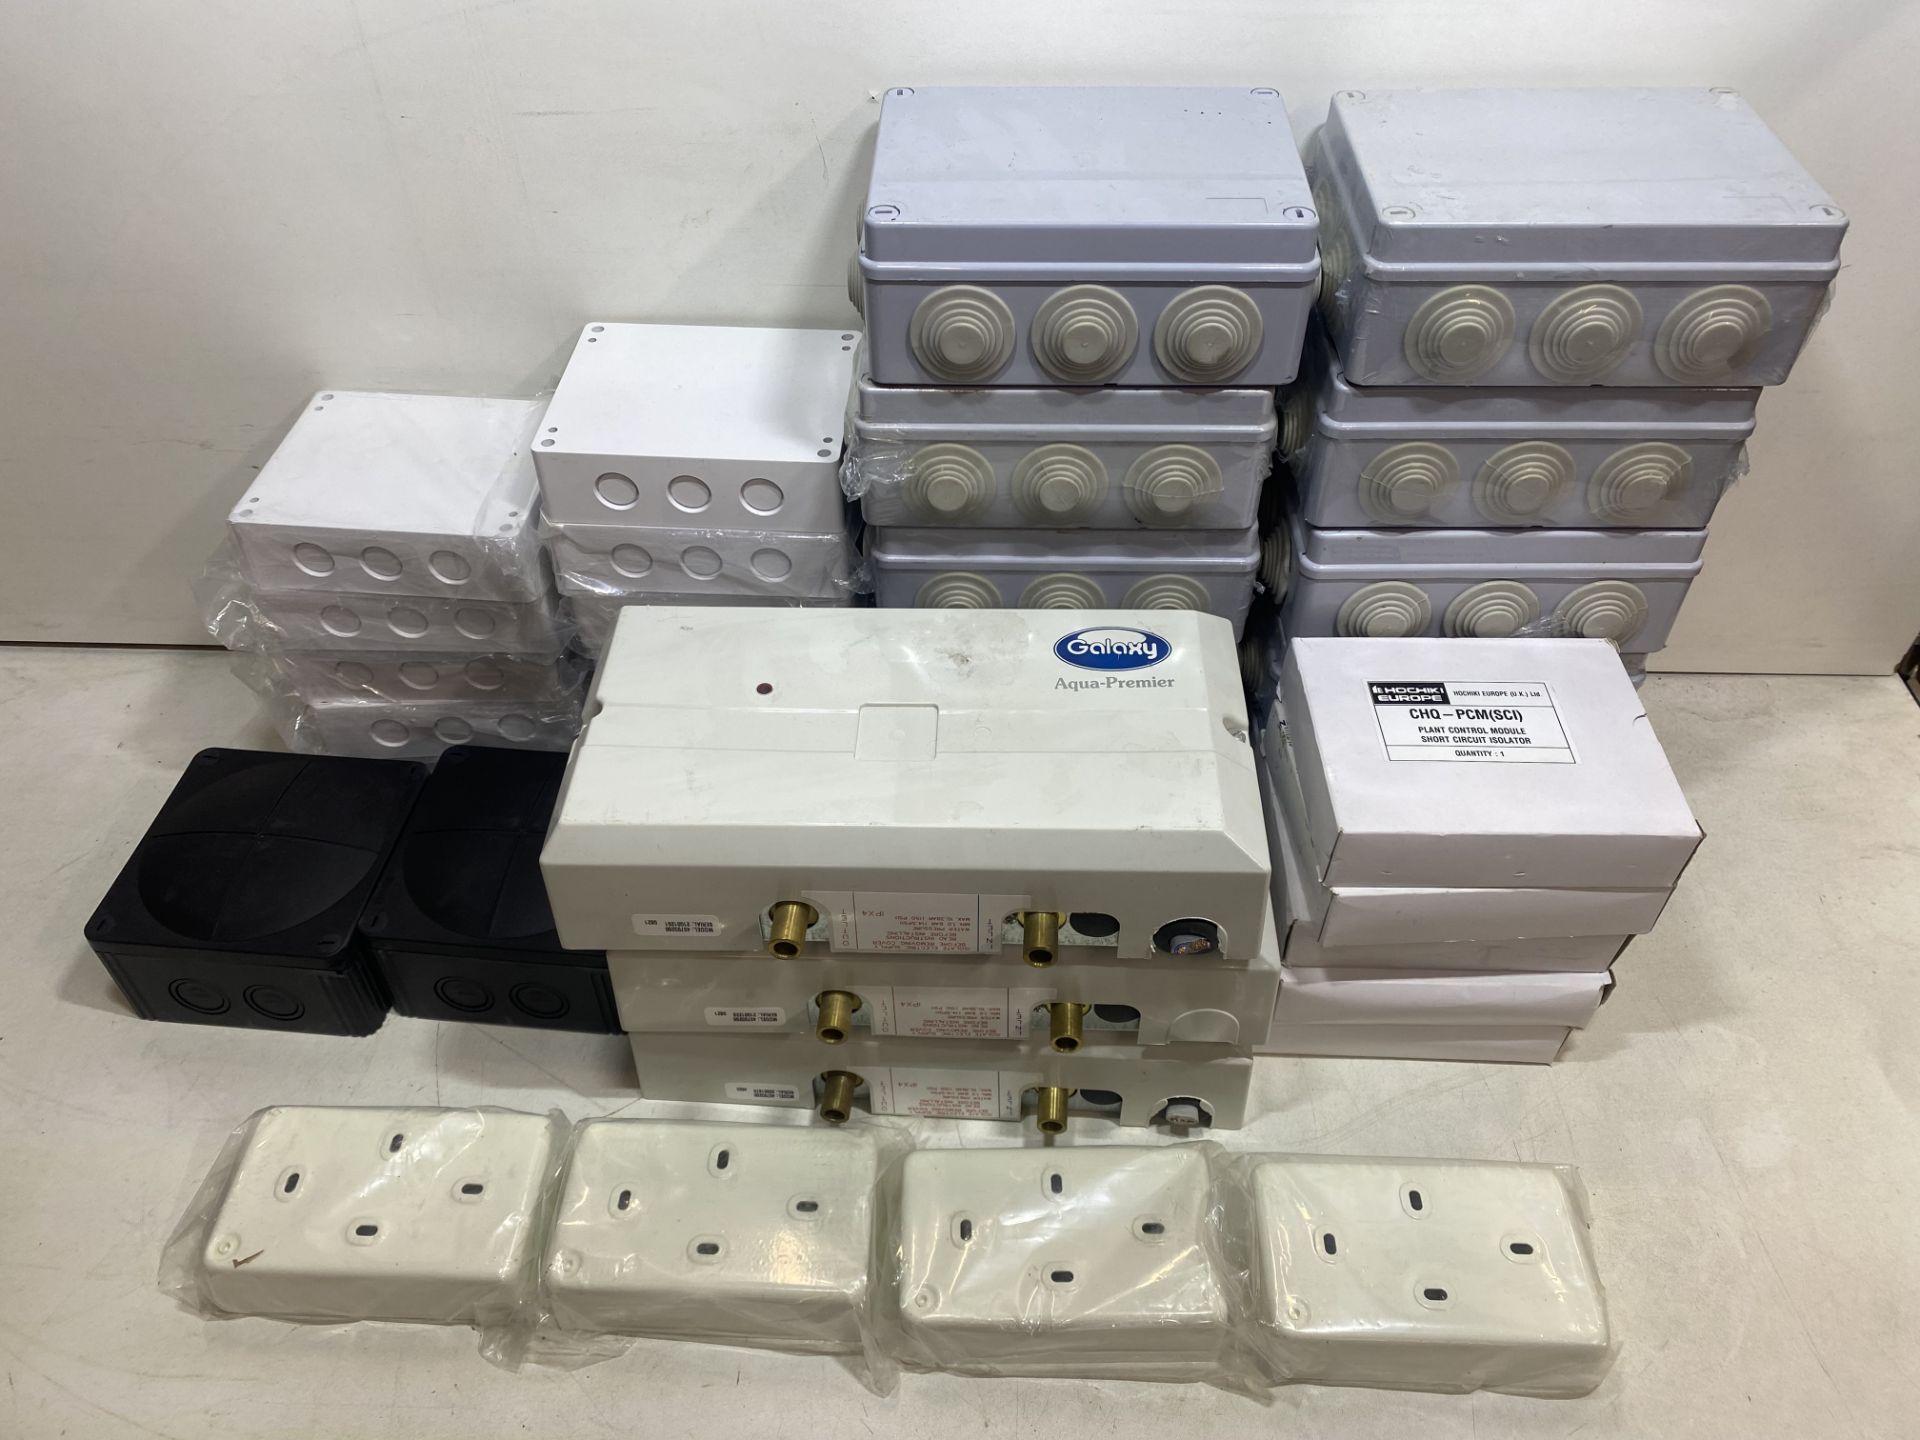 Quantity Of Various Electrical / Bathroom Fittings Inc Water Heaters, Circuit Isolators & Junction B